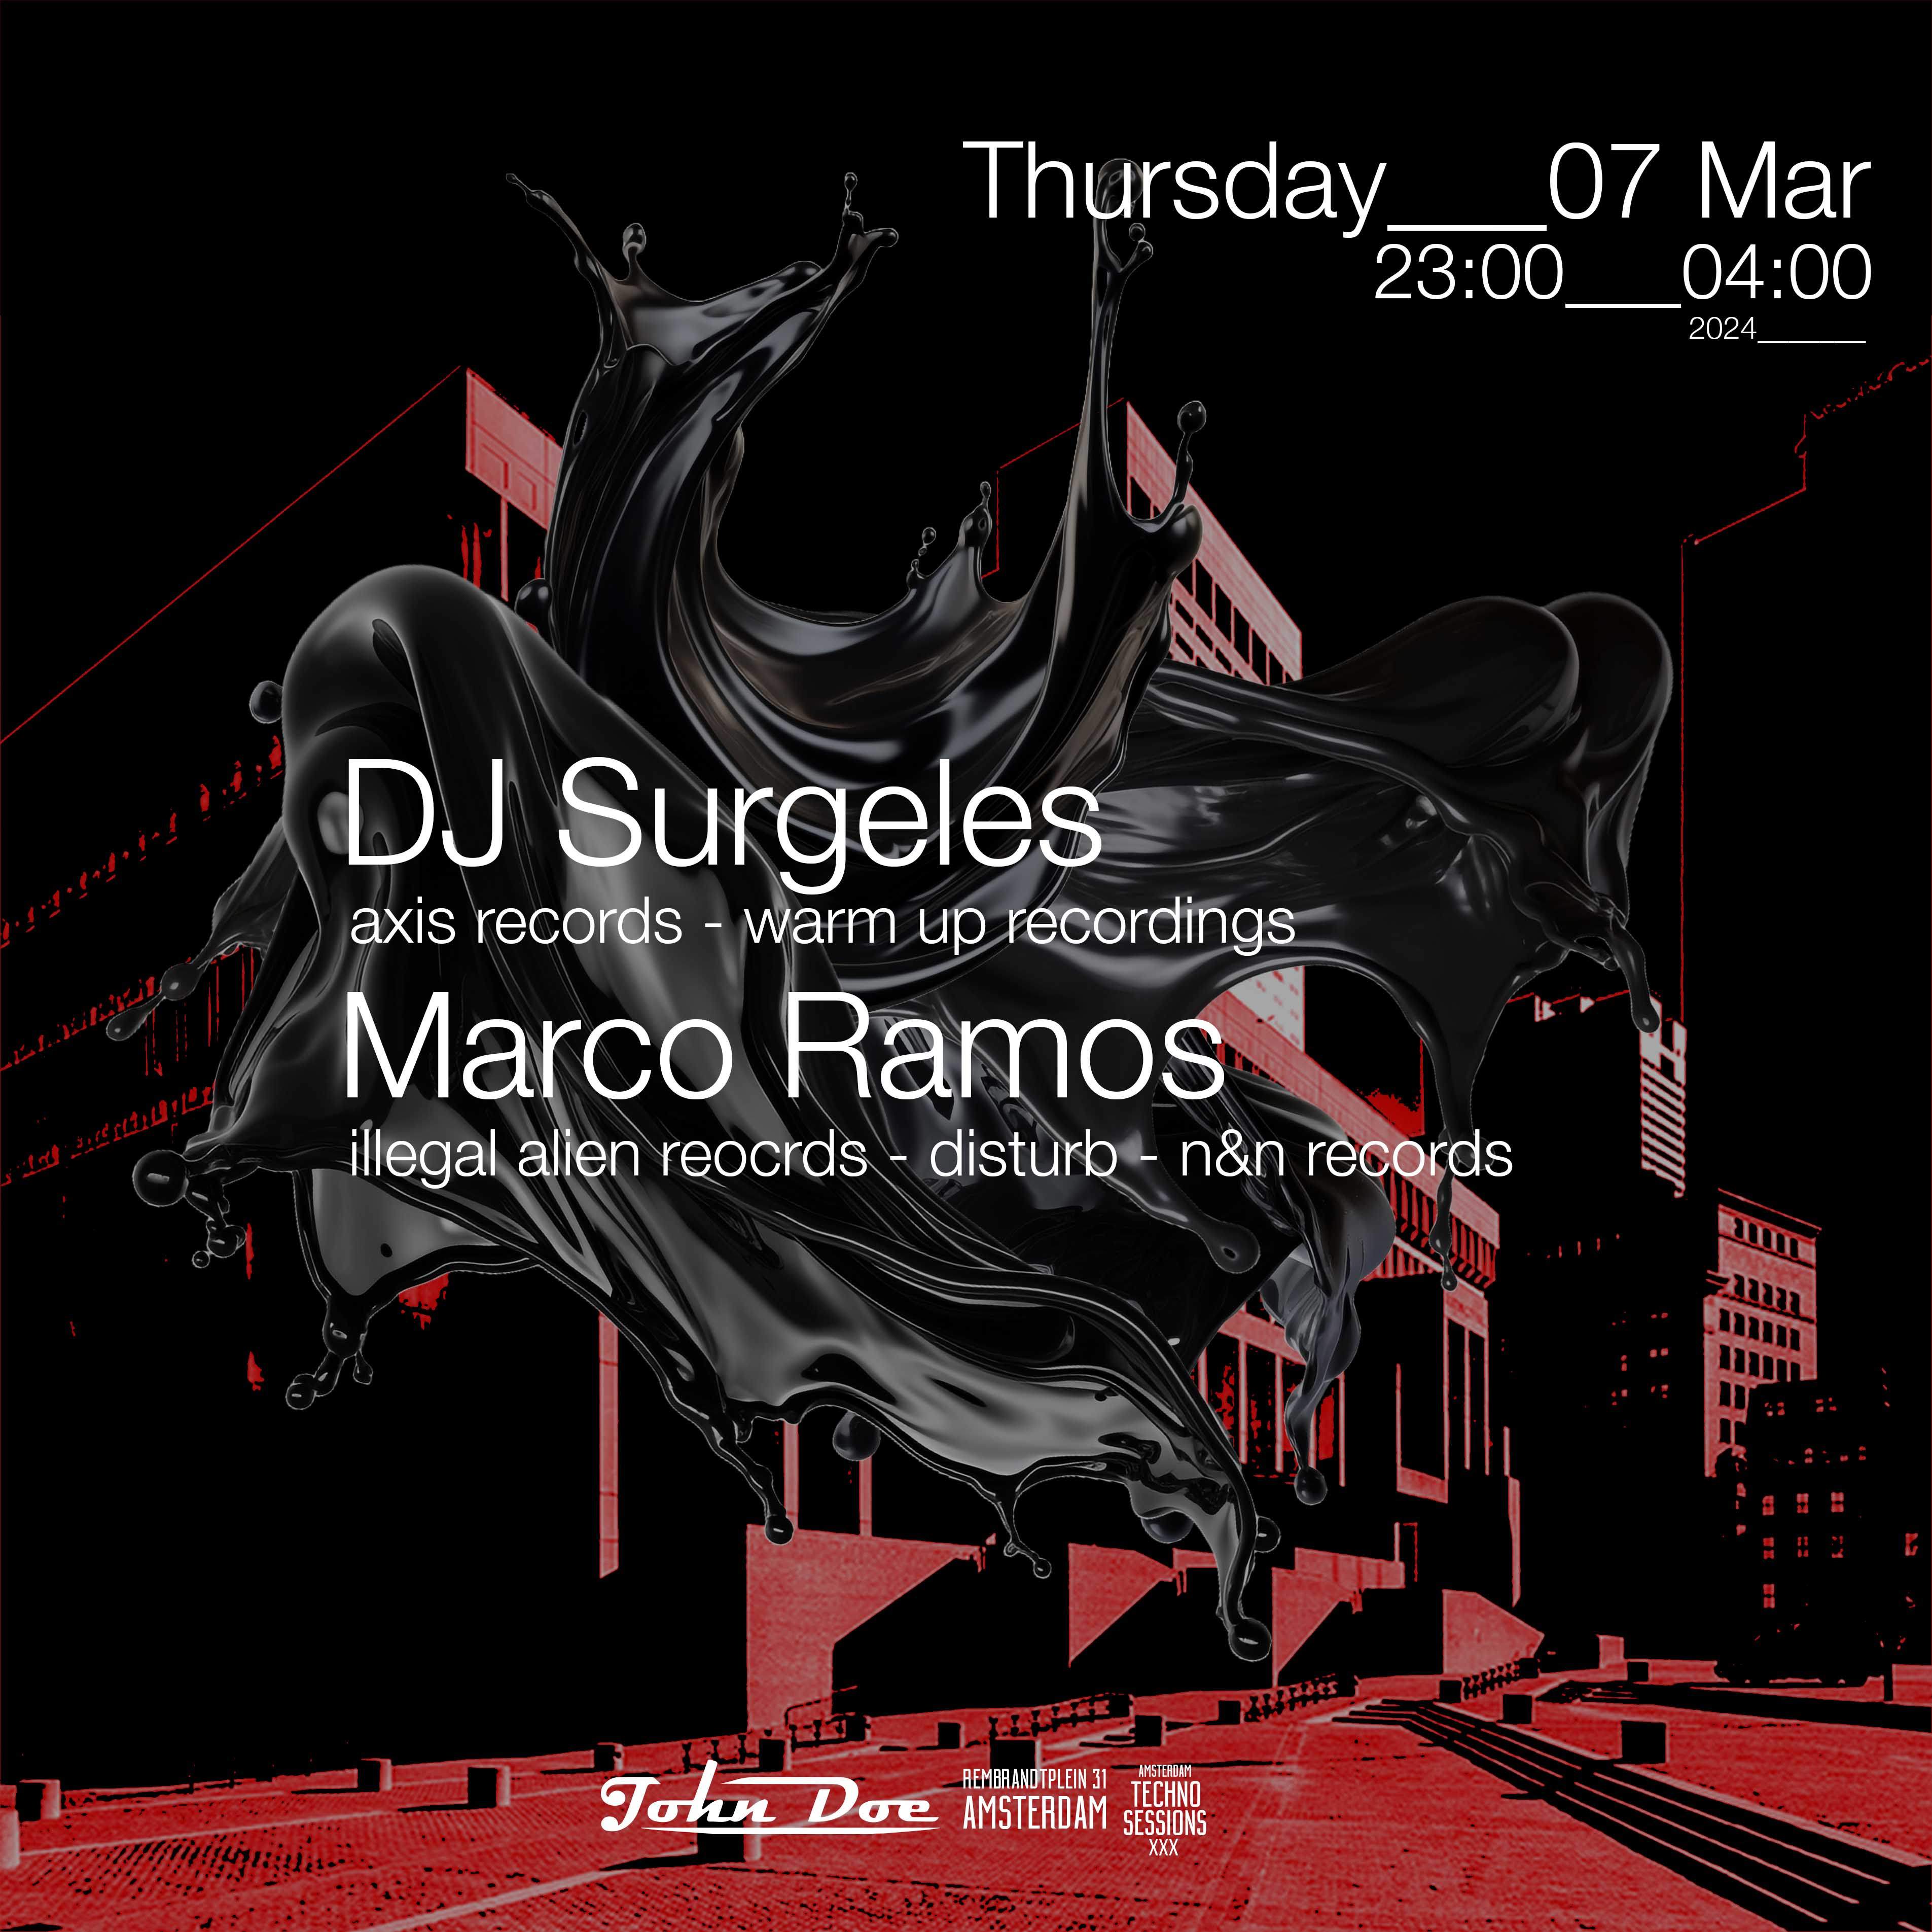 Amsterdam Techno Sessions with DJ Surgeles (Axis Records - Warm Up Recordings) - Página frontal